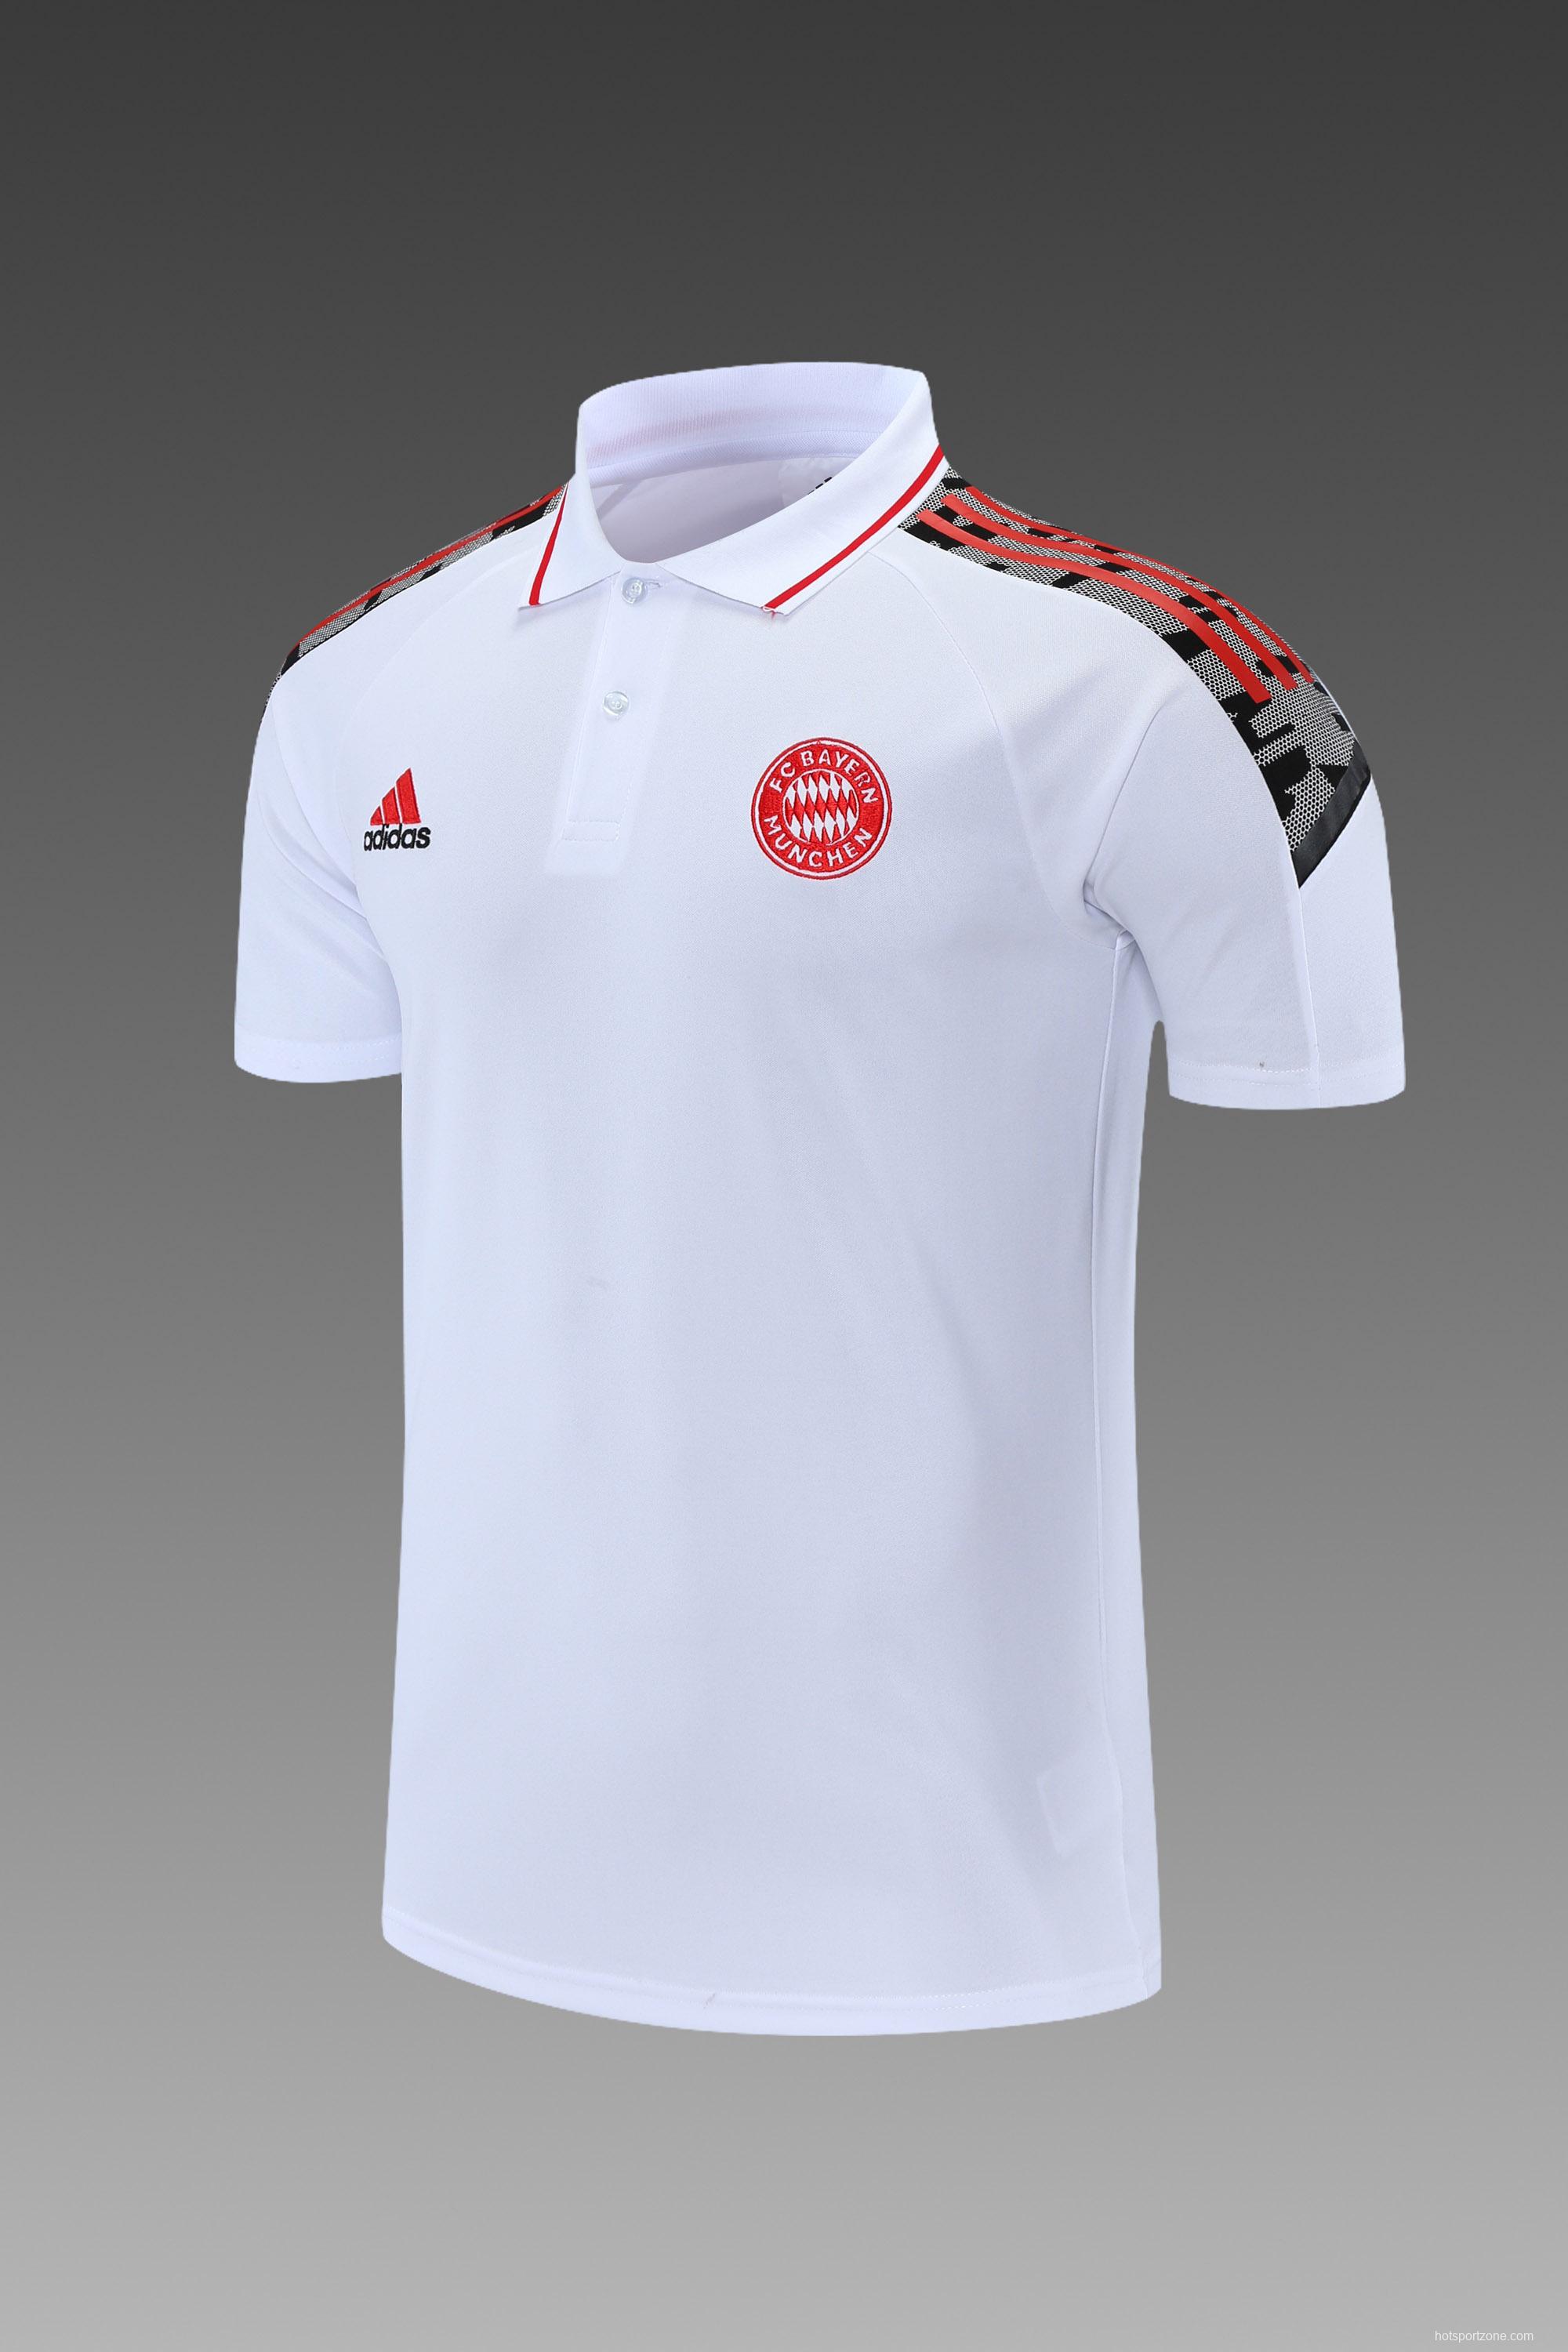 Bayern Munich POLO kit White(not supported to be sold separately)